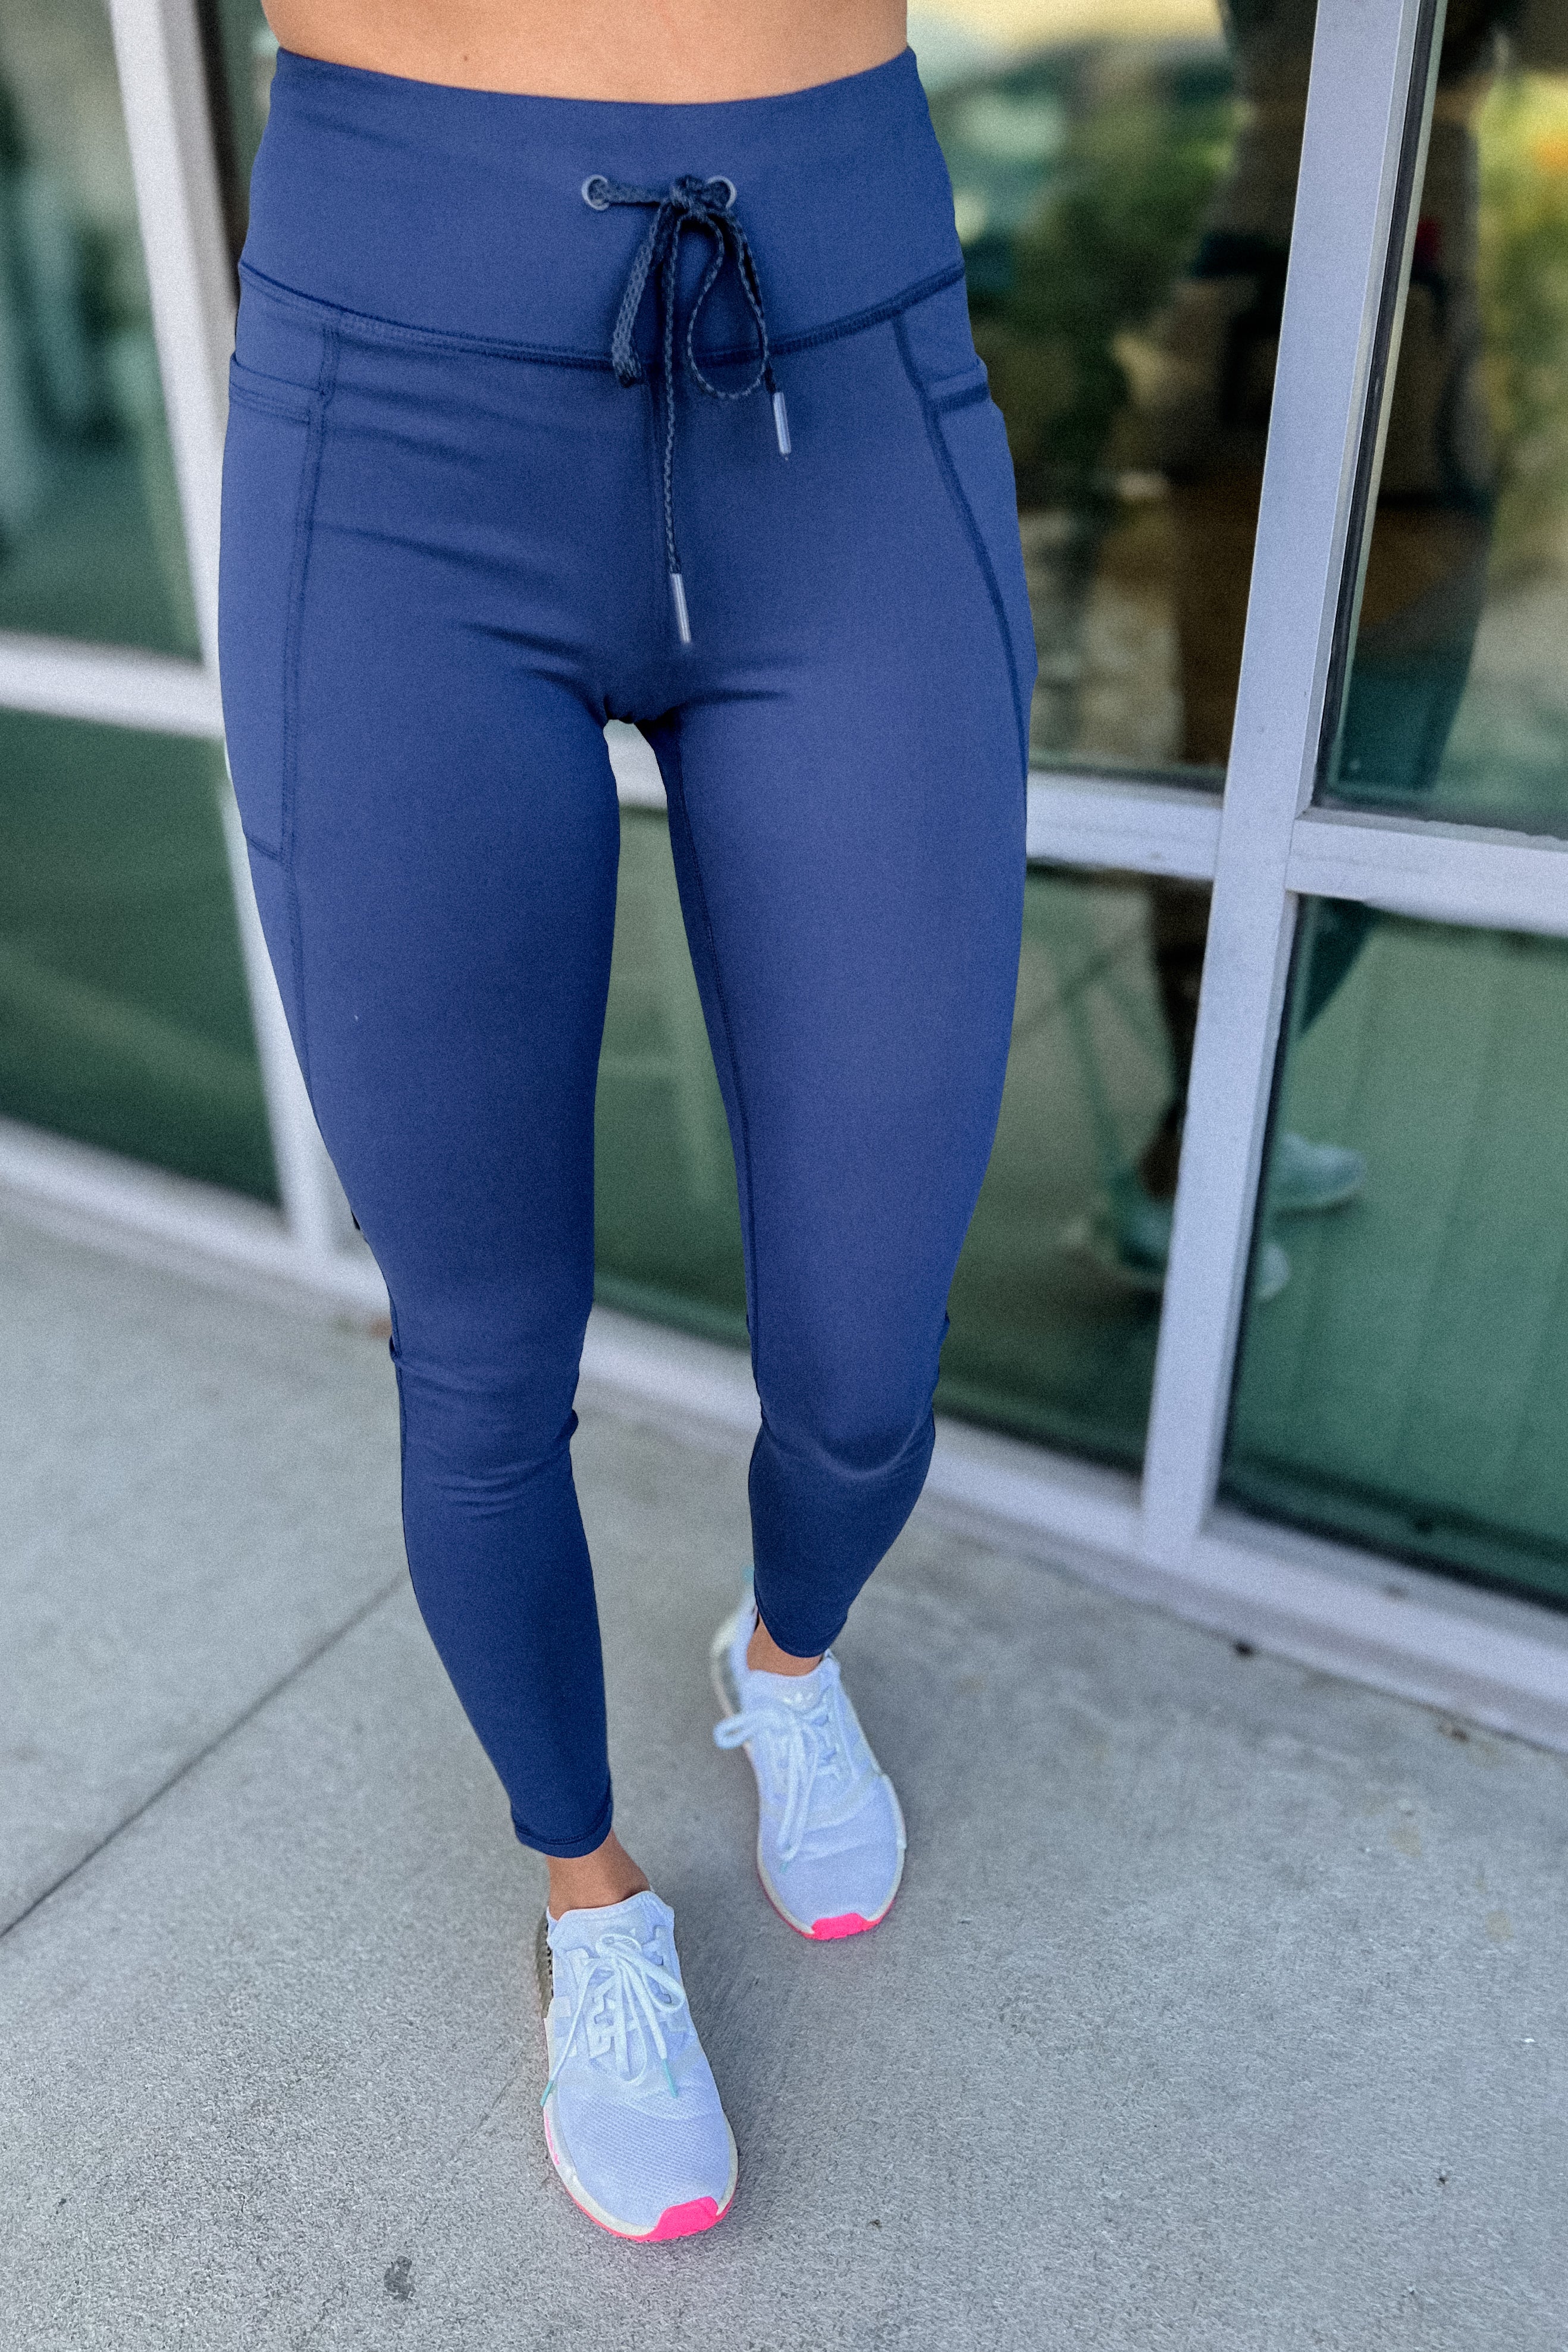 A New Routine Navy Blue Drawstring Leggings – Simply Me Boutique